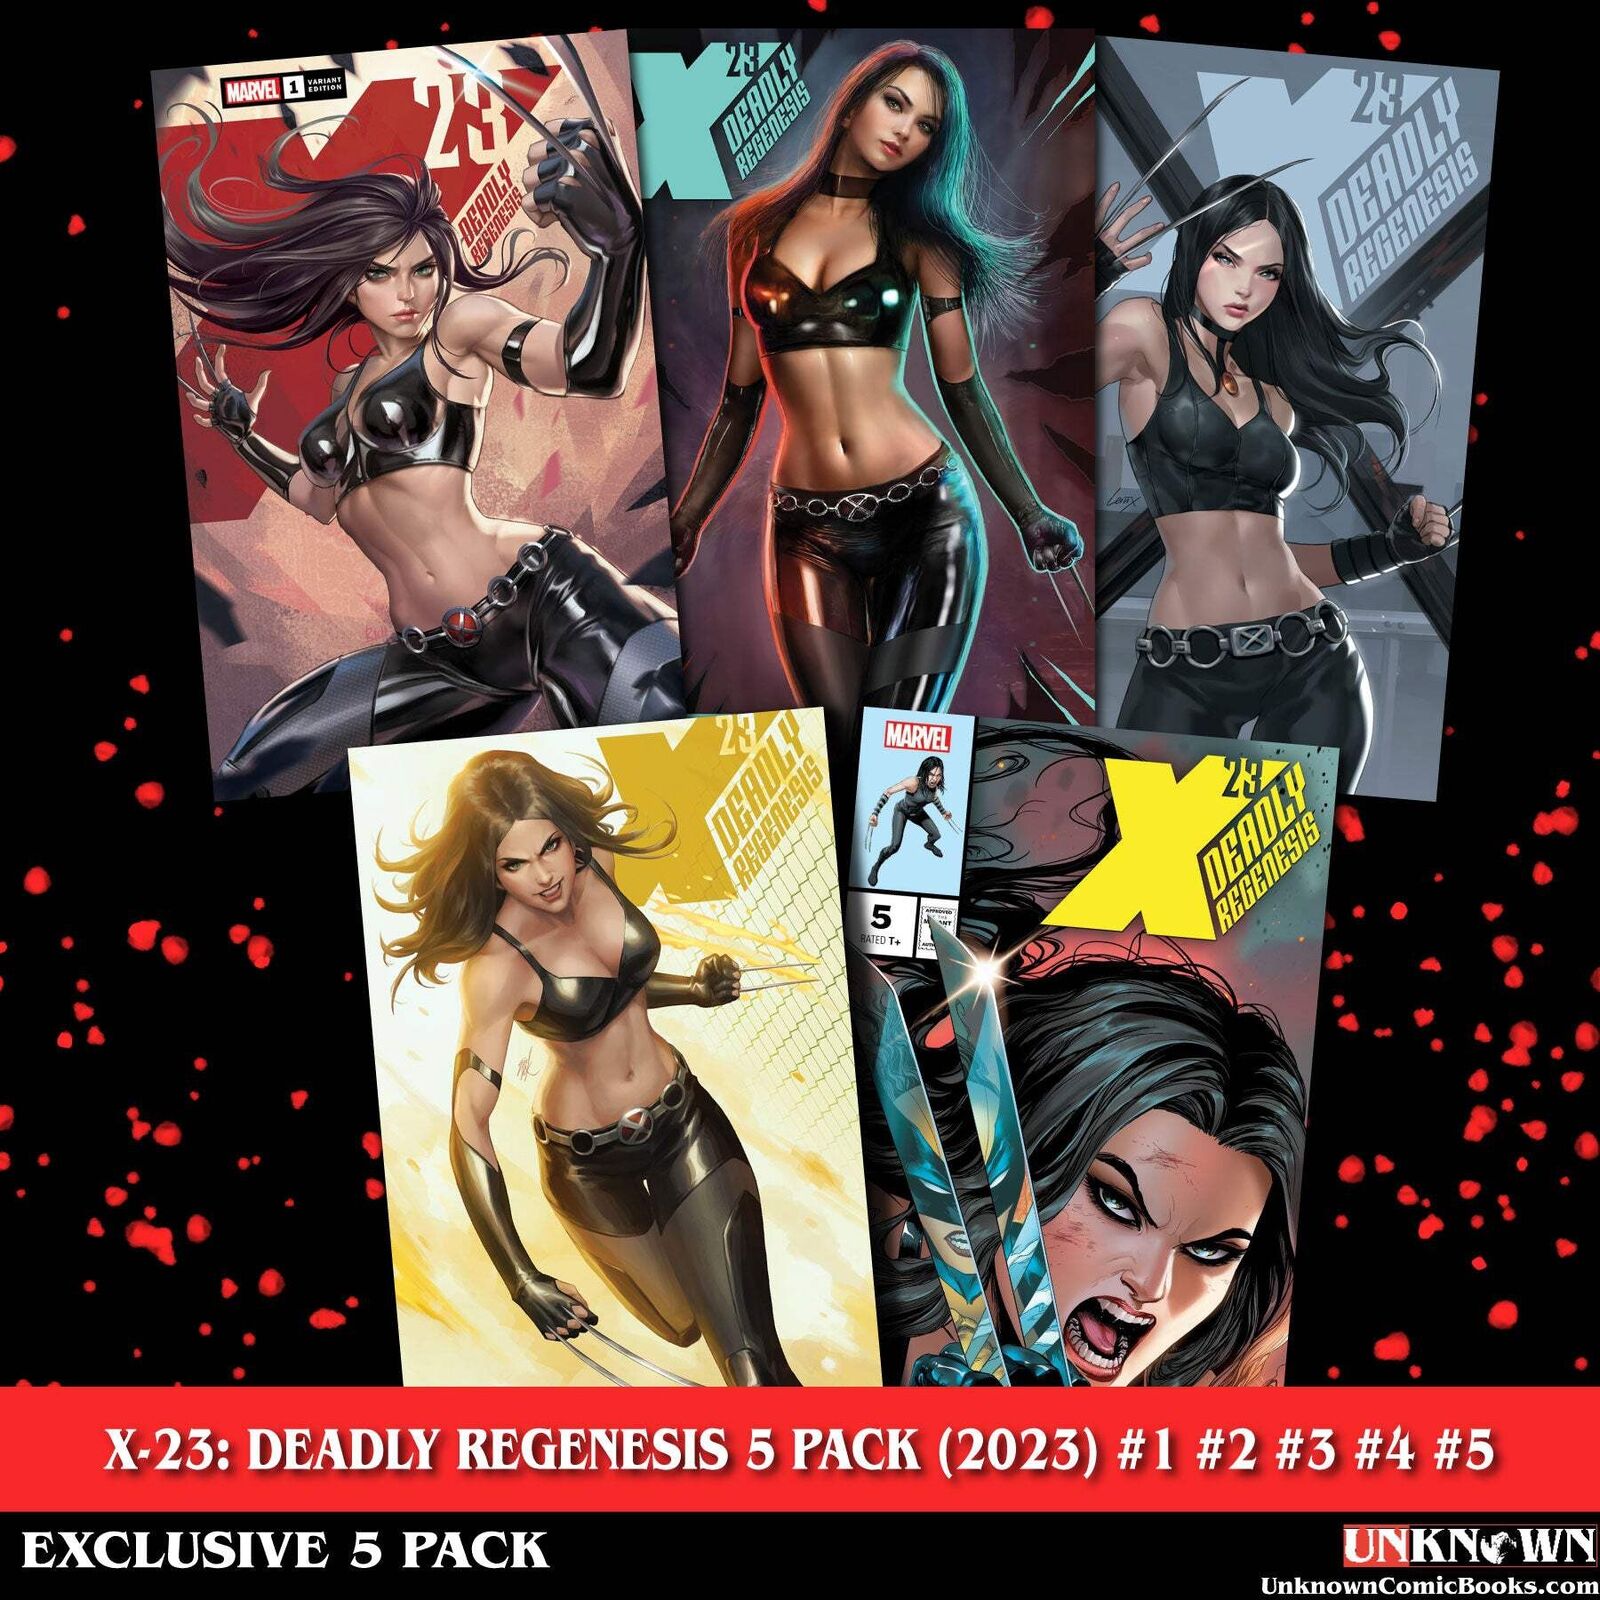 [5 PACK] TRADE X-23: DEADLY REGENESIS #1, #2, #3, #4, #5 UNKNOWN COMICS EXCLUSIV